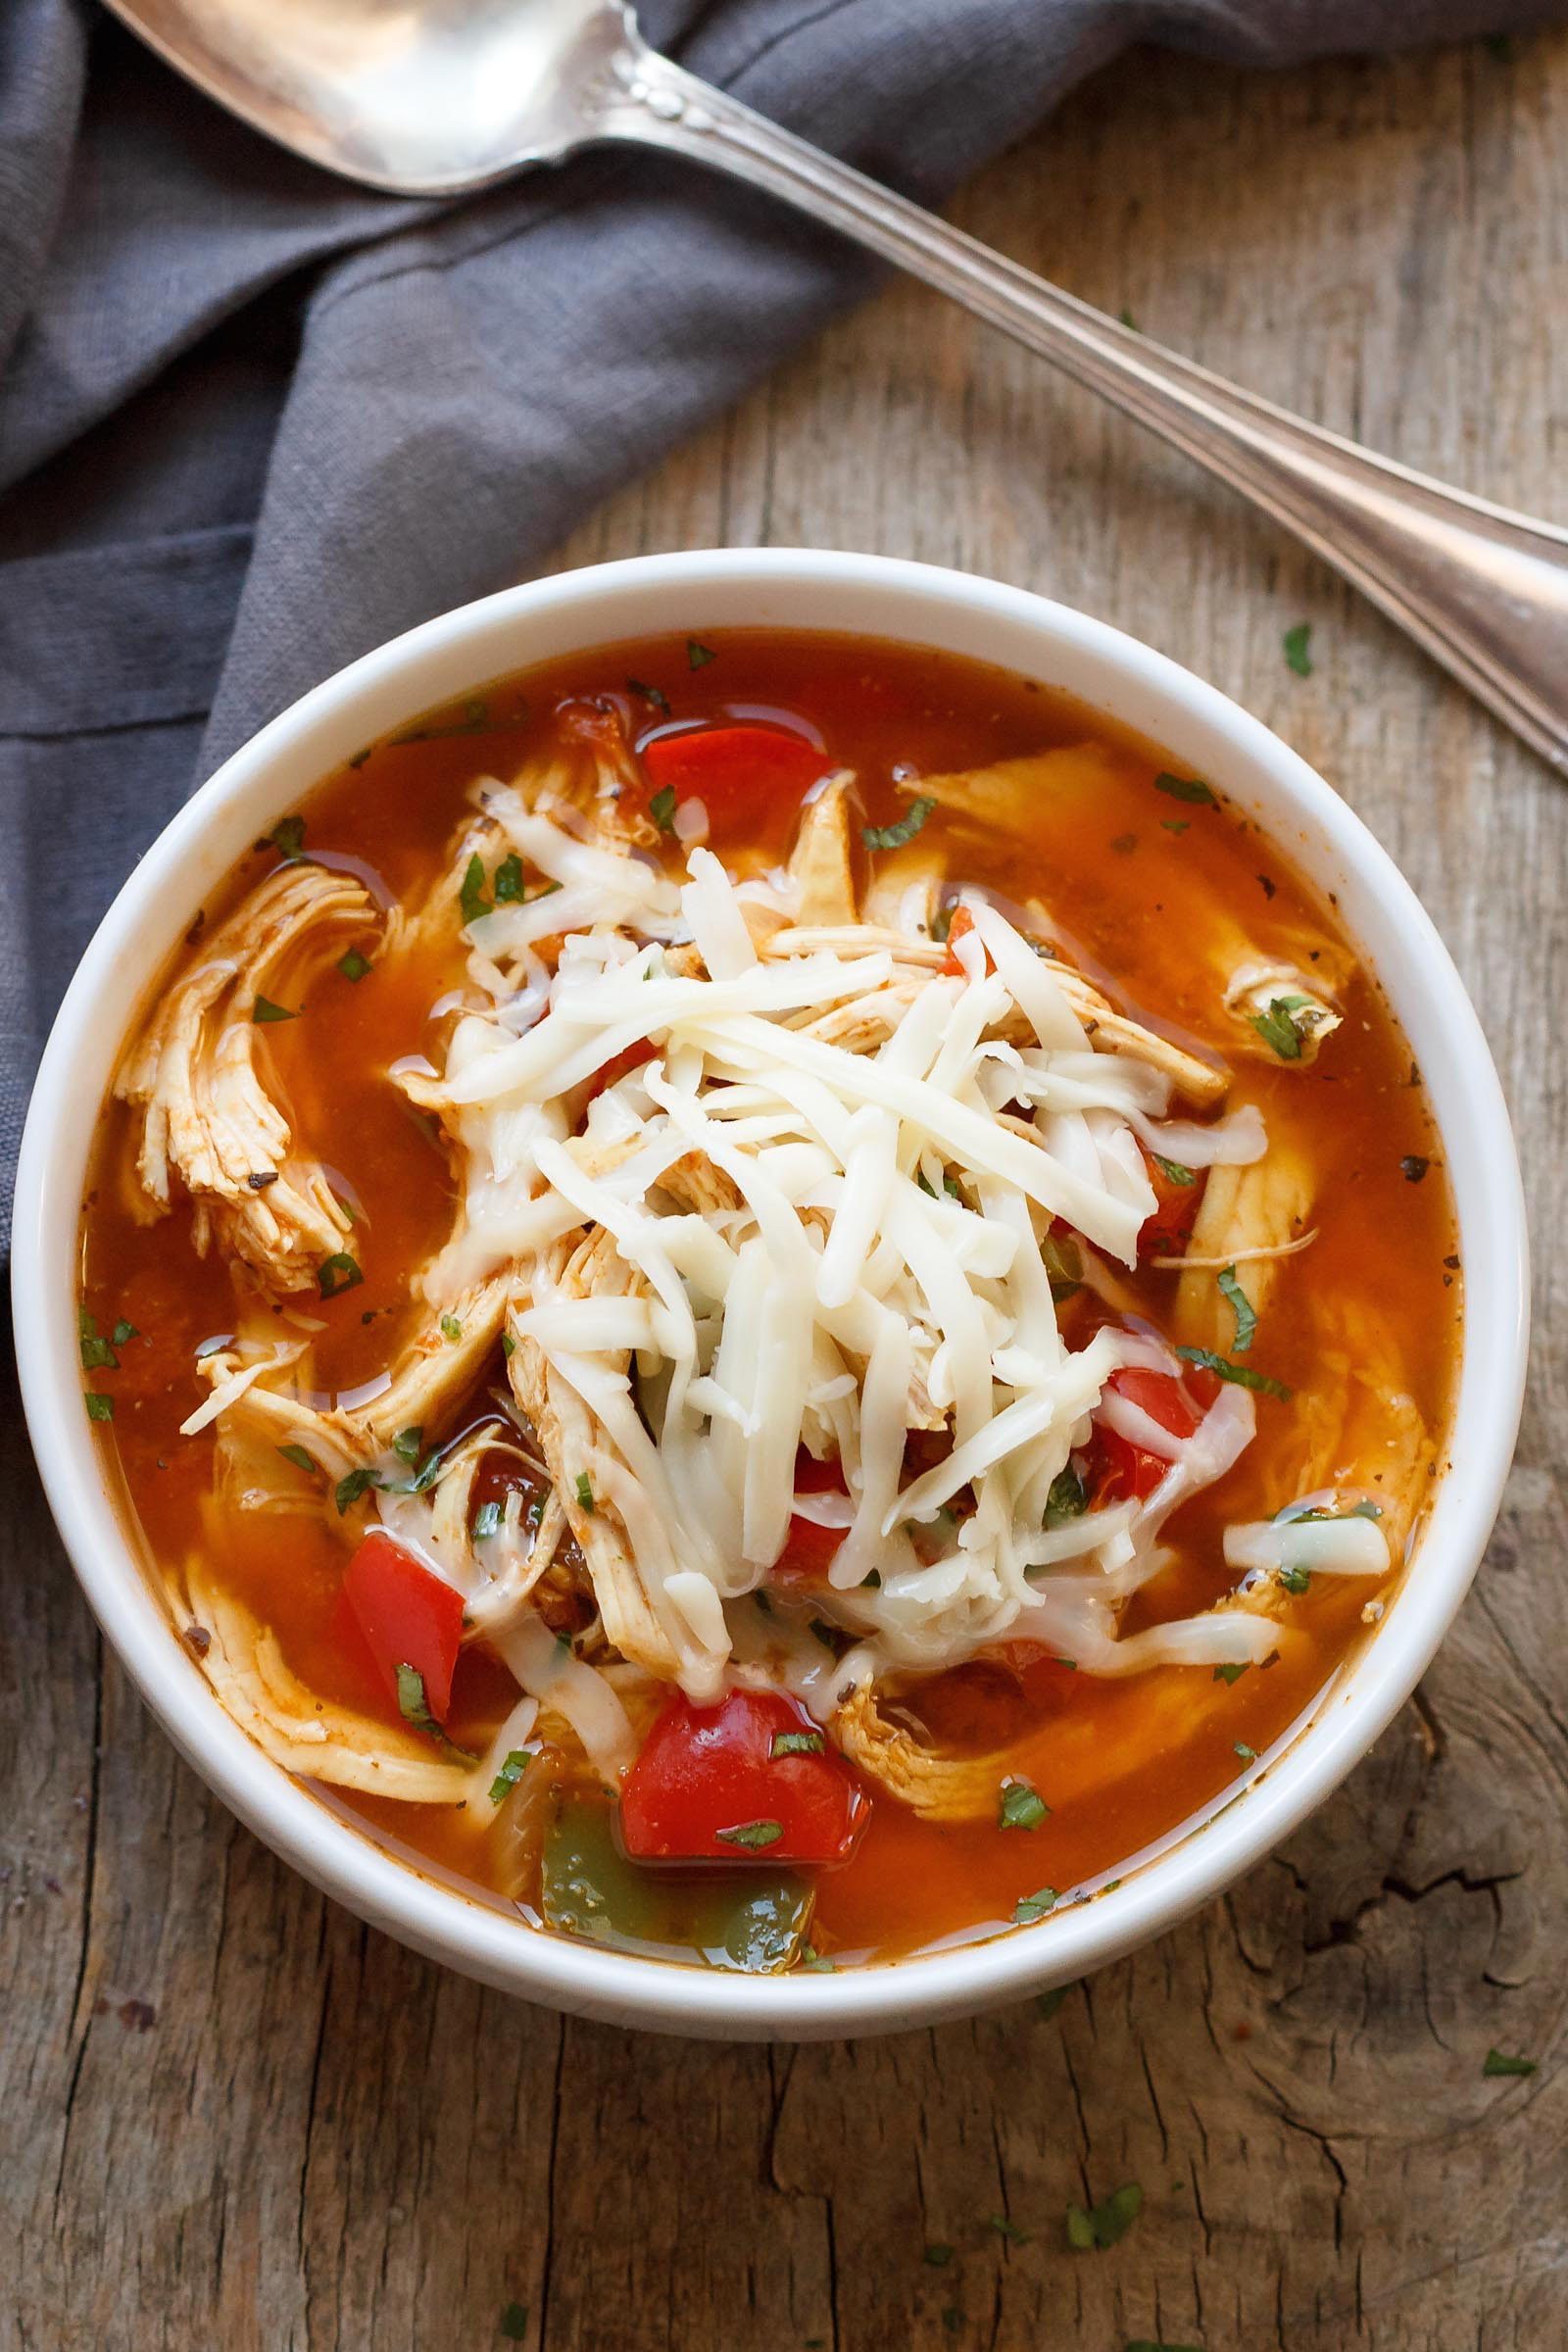 Instant Pot Fajita Chicken Soup Recipe - #eatwell101,#recipe The perfect #chicken #soup for a busy day and the #InstantPot makes it even simpler!